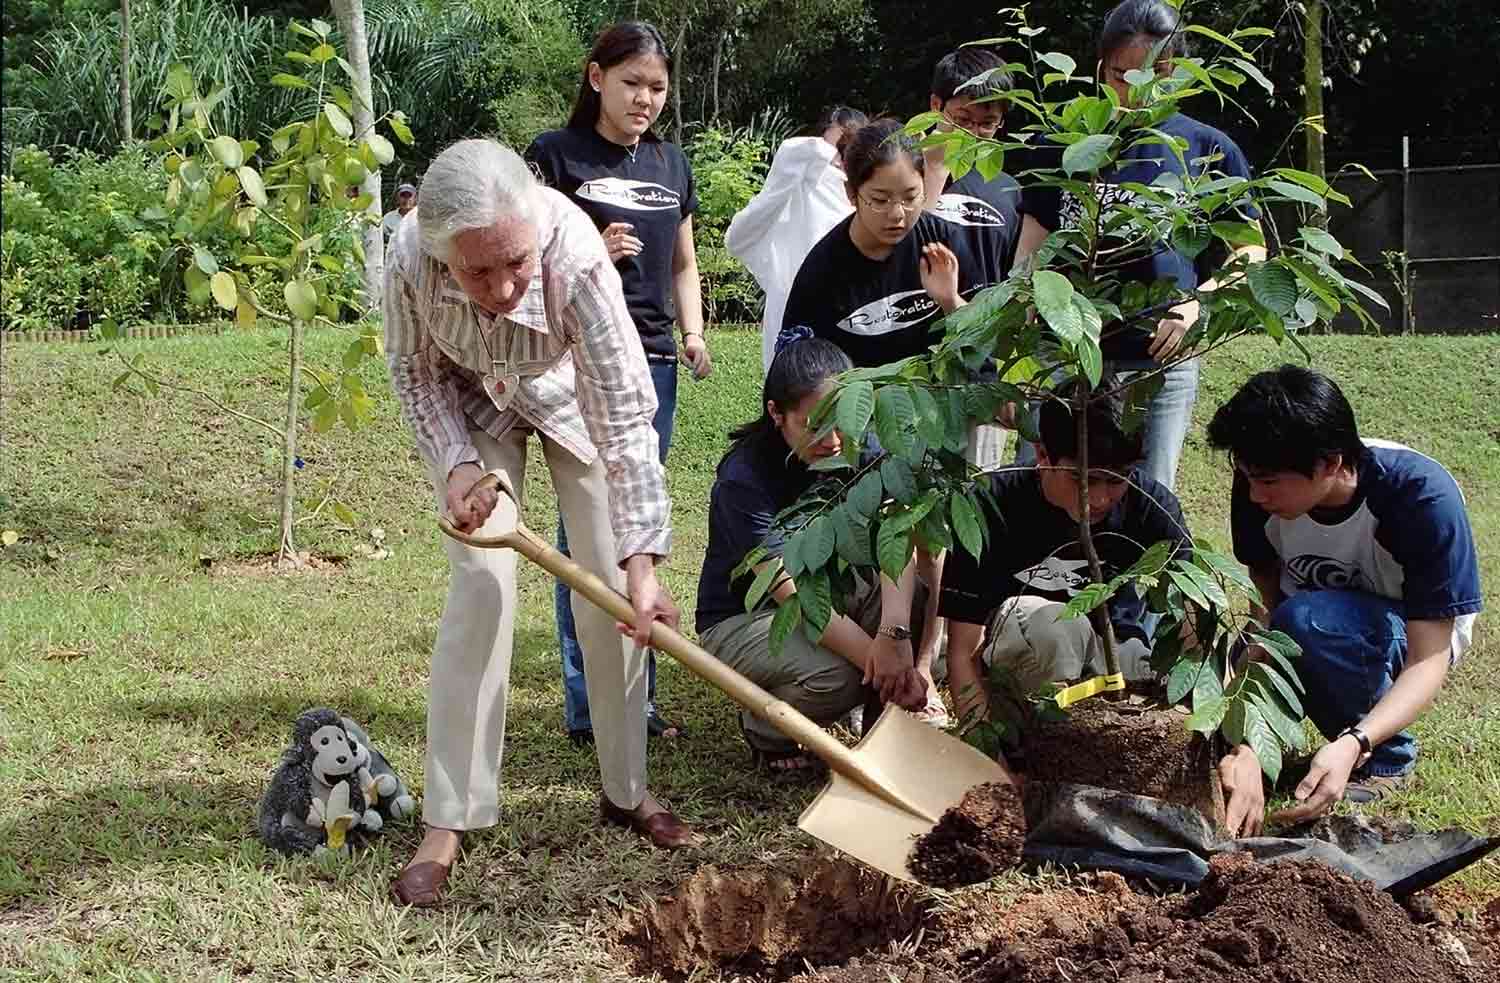 Children and teens watch as Jane Goodall digs a hole next to a tree sapling.